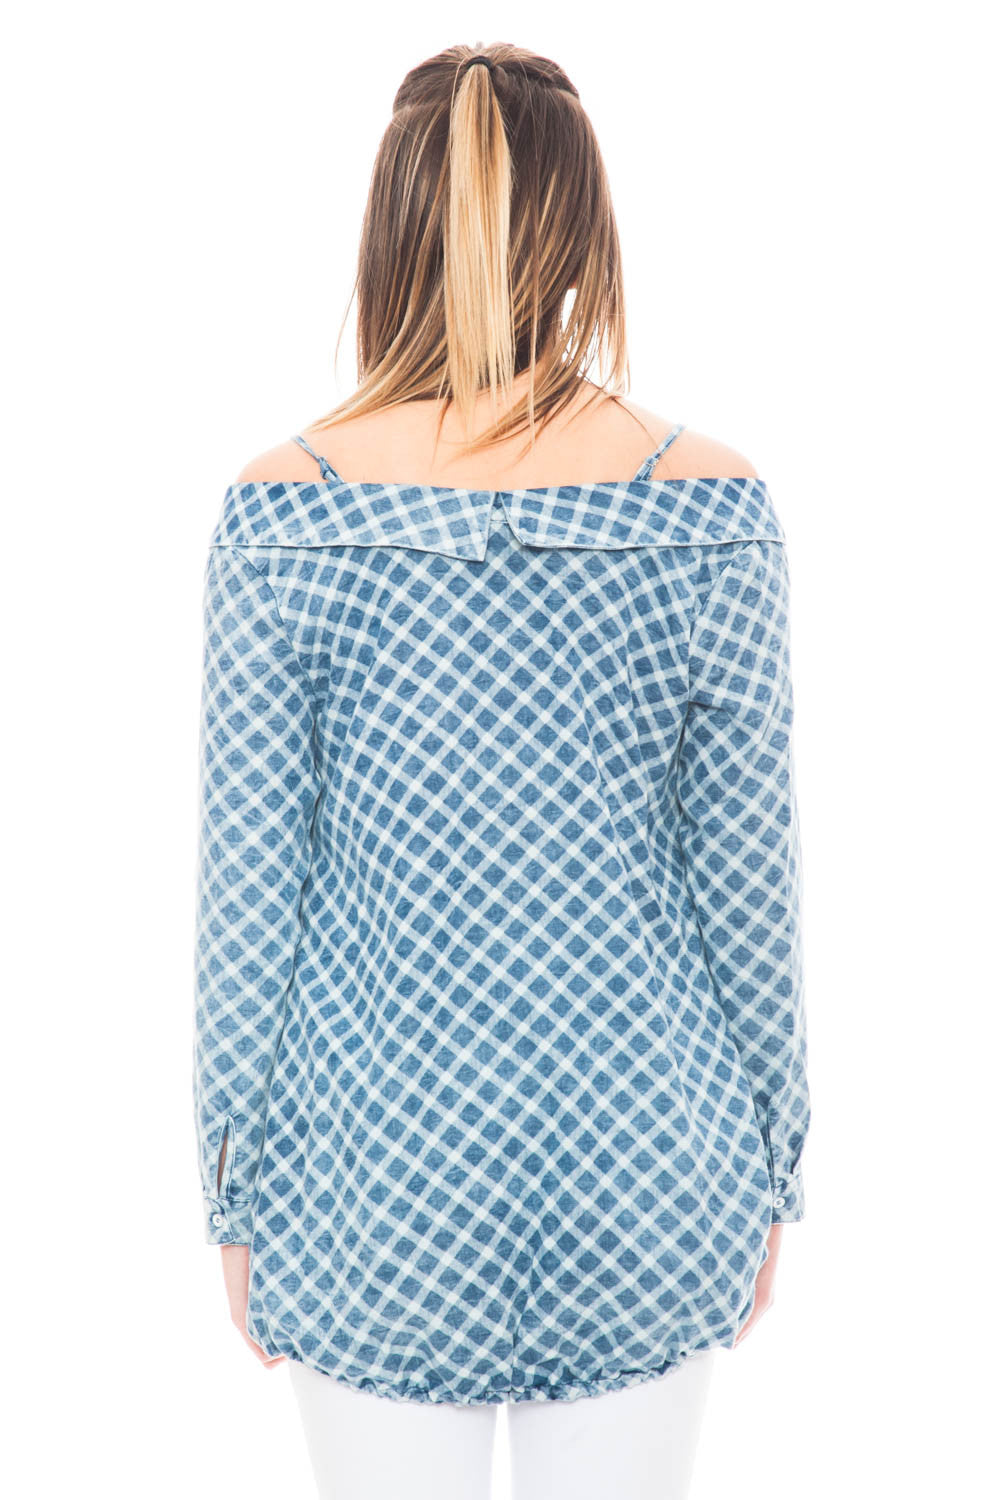 Shirt - Checkered Denim Off Shoulder Top with Collar